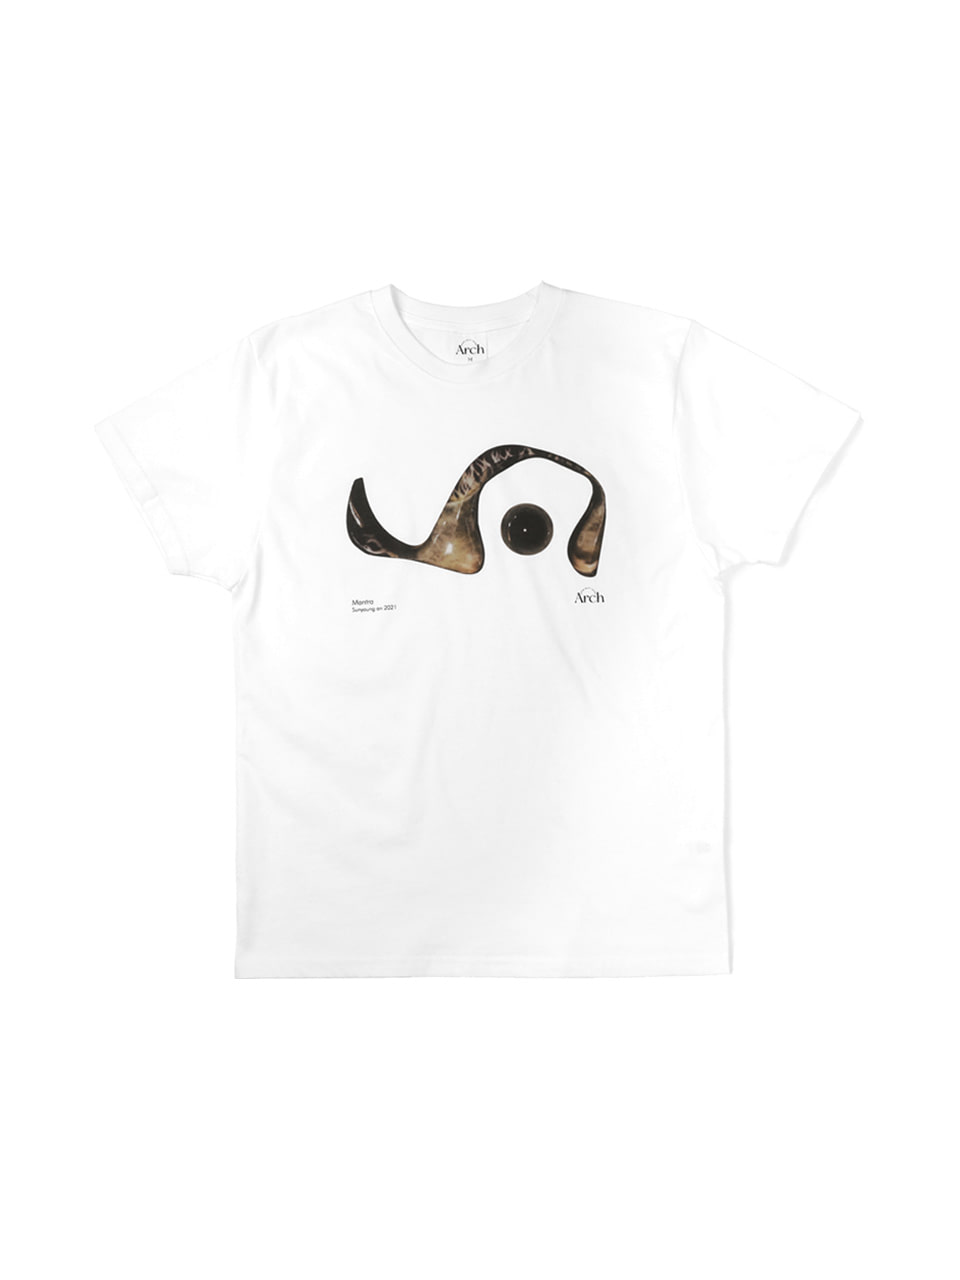 Sunyoung an Mantra #2 short sleeve T-shirt white